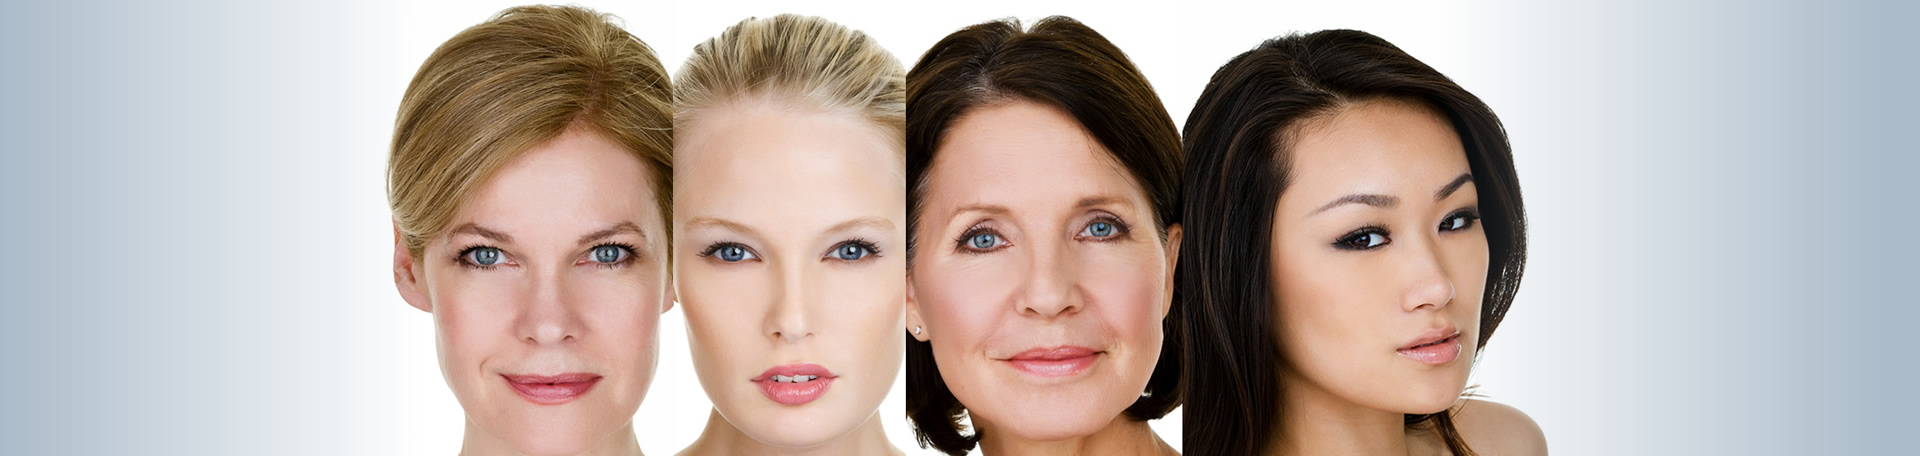 Four woman with no frown wrinkles or crows feet